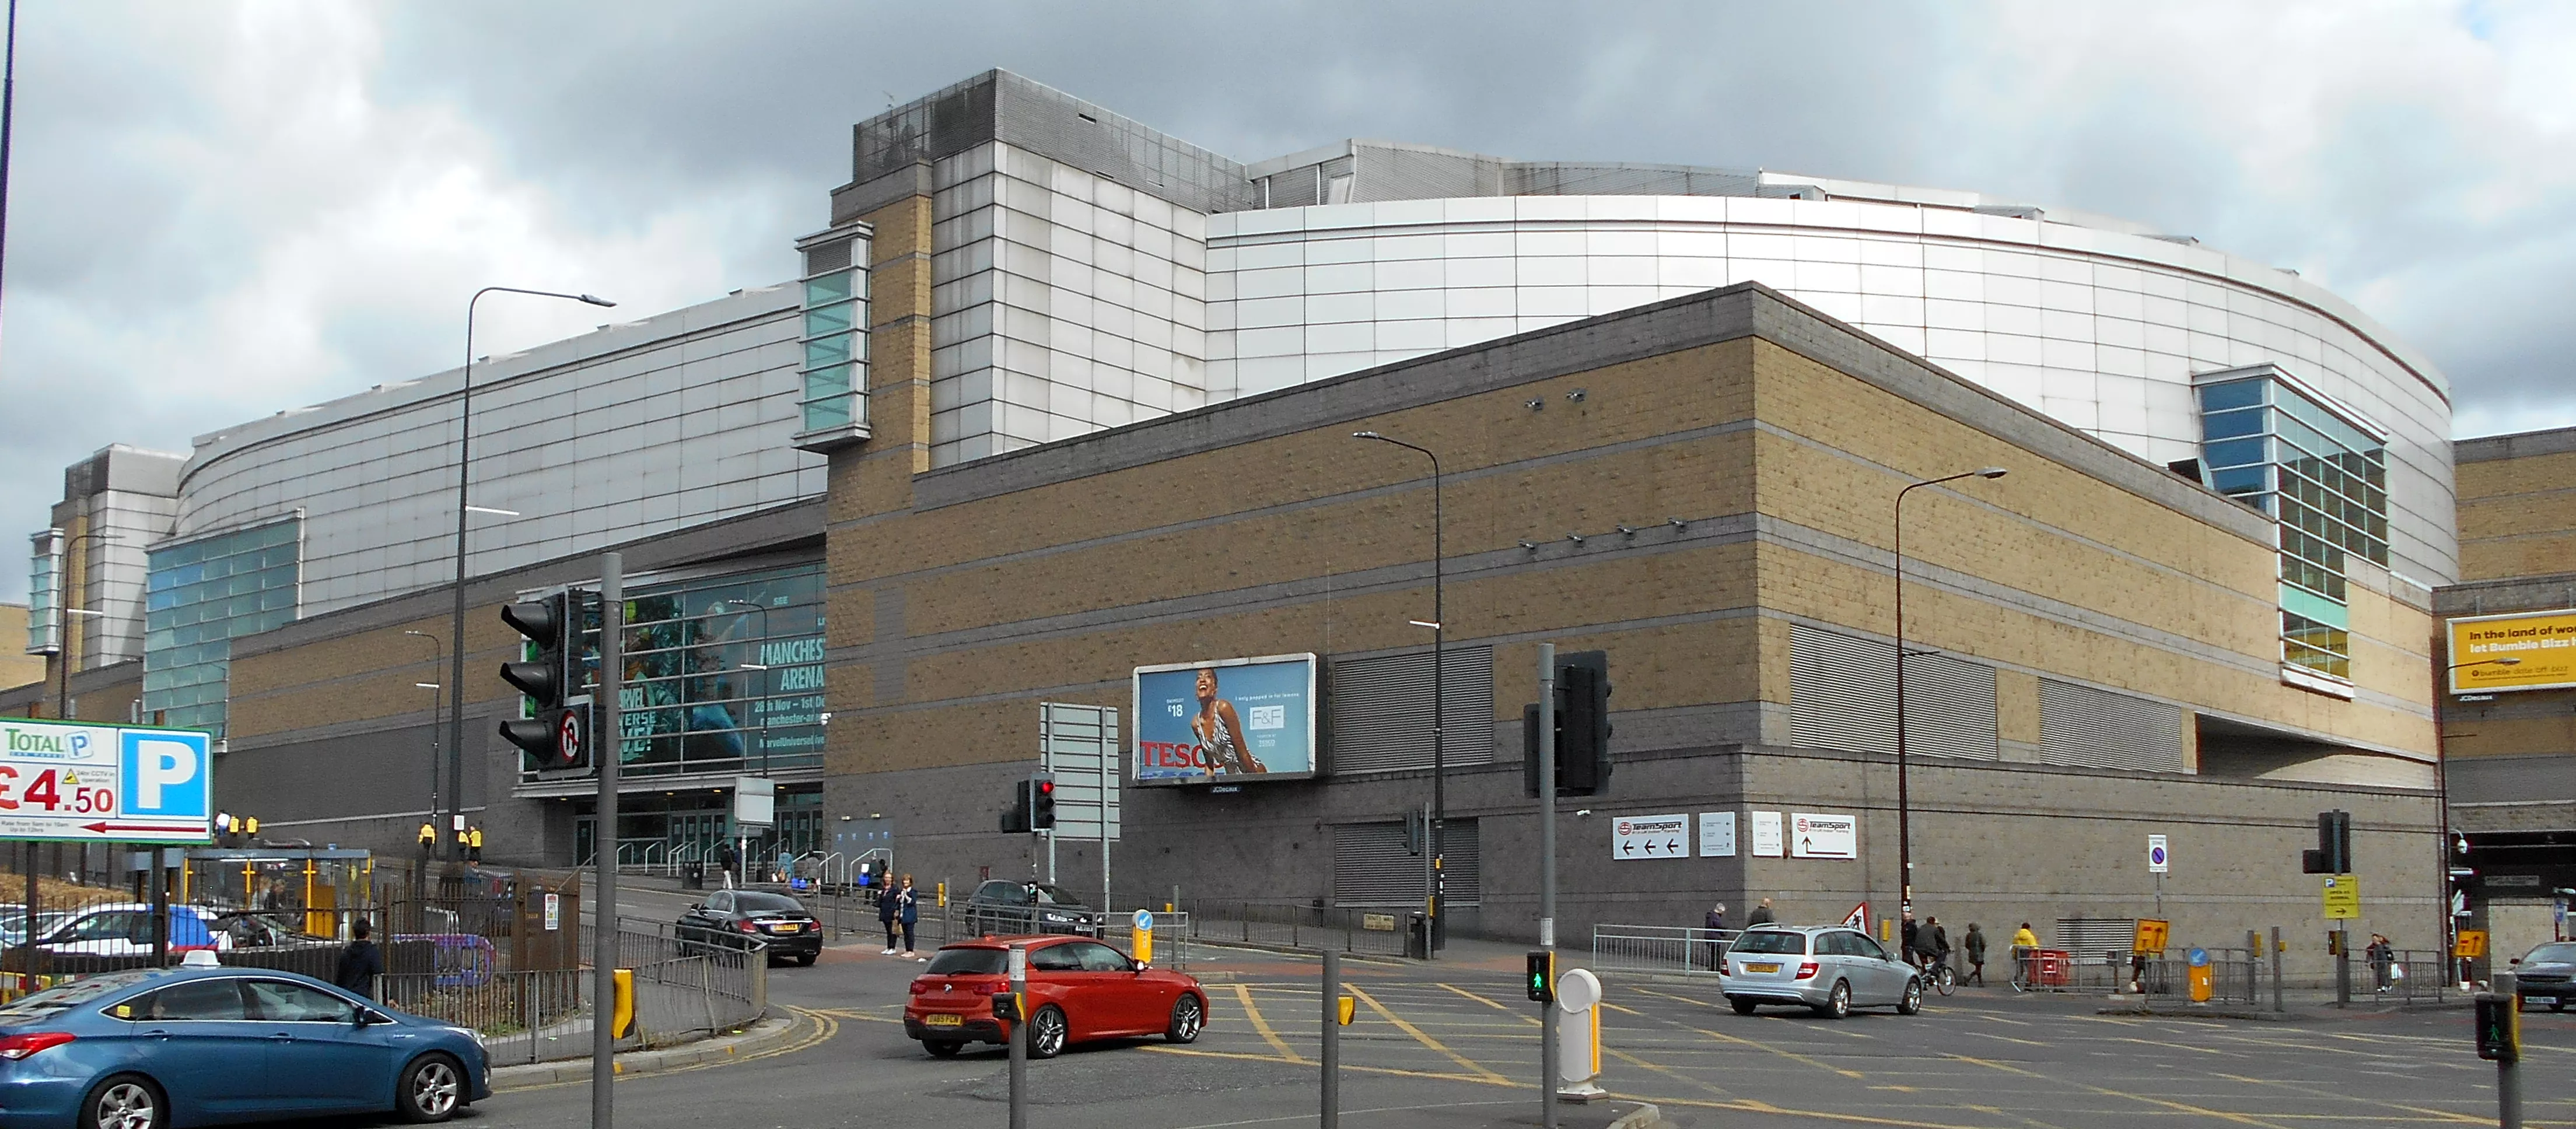 Manchester Arena in United Kingdom, Europe | Hockey - Rated 6.7